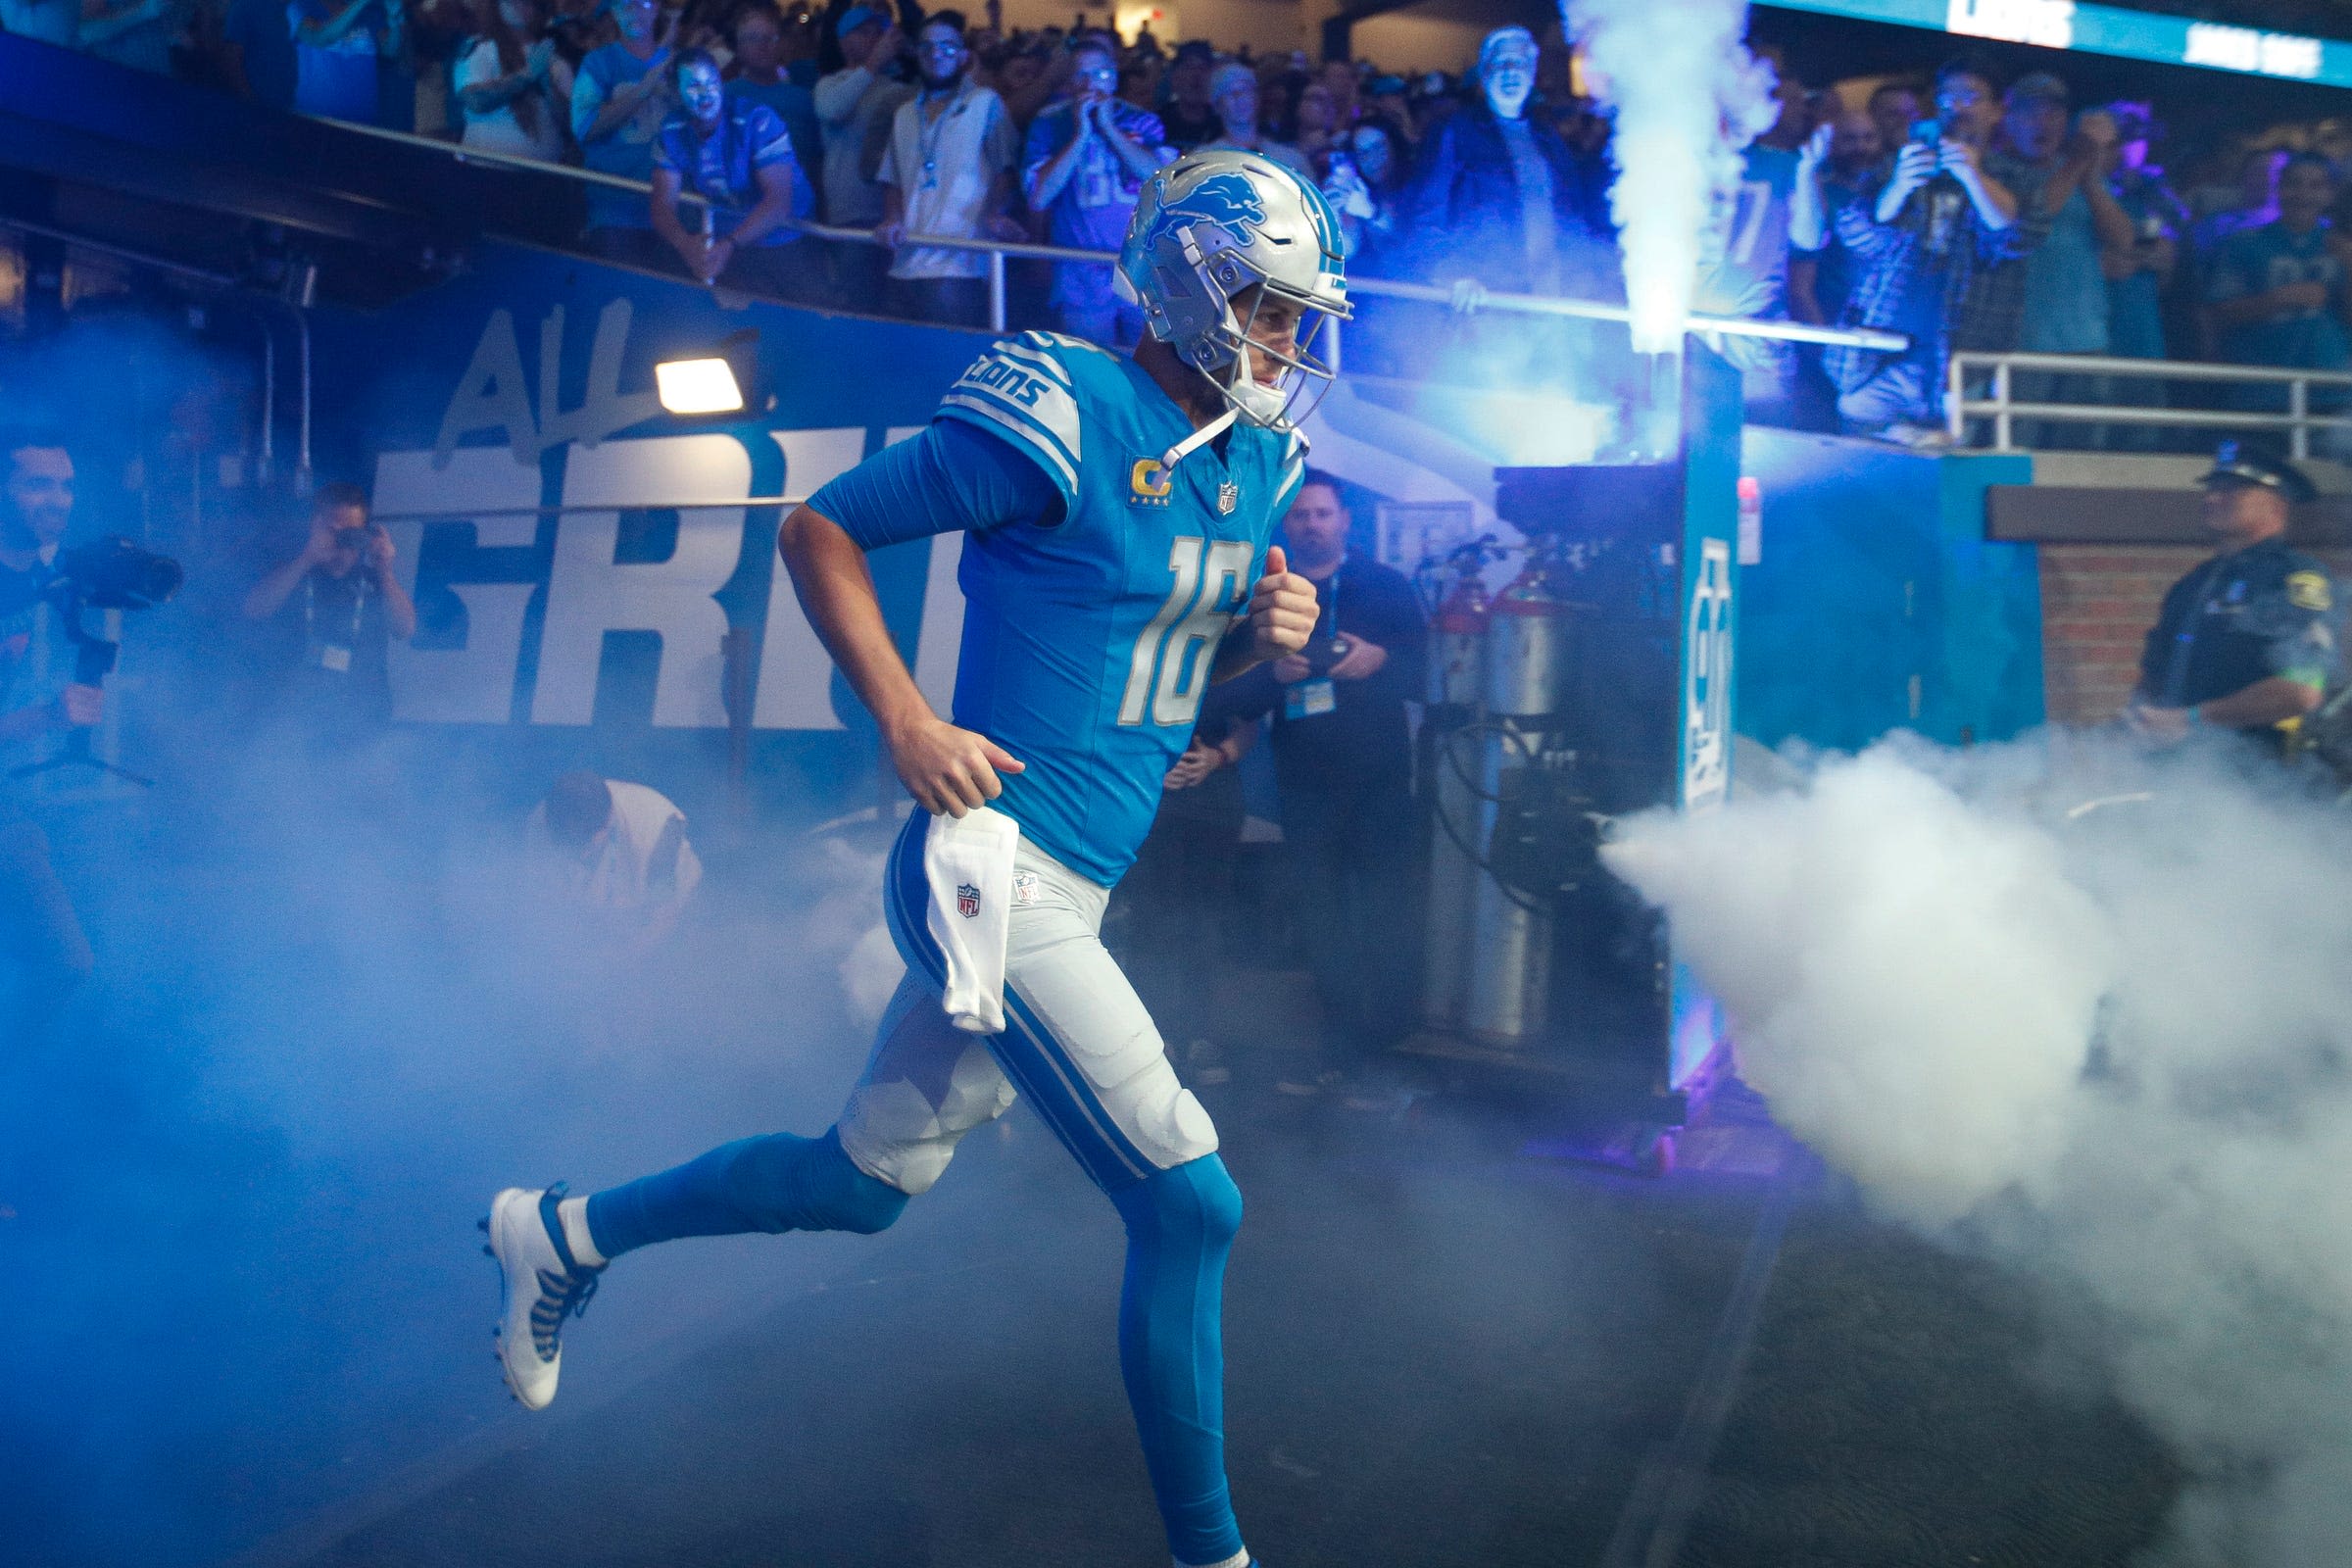 Now that Jared Goff is locked down, here's how he stands in Detroit Lions history